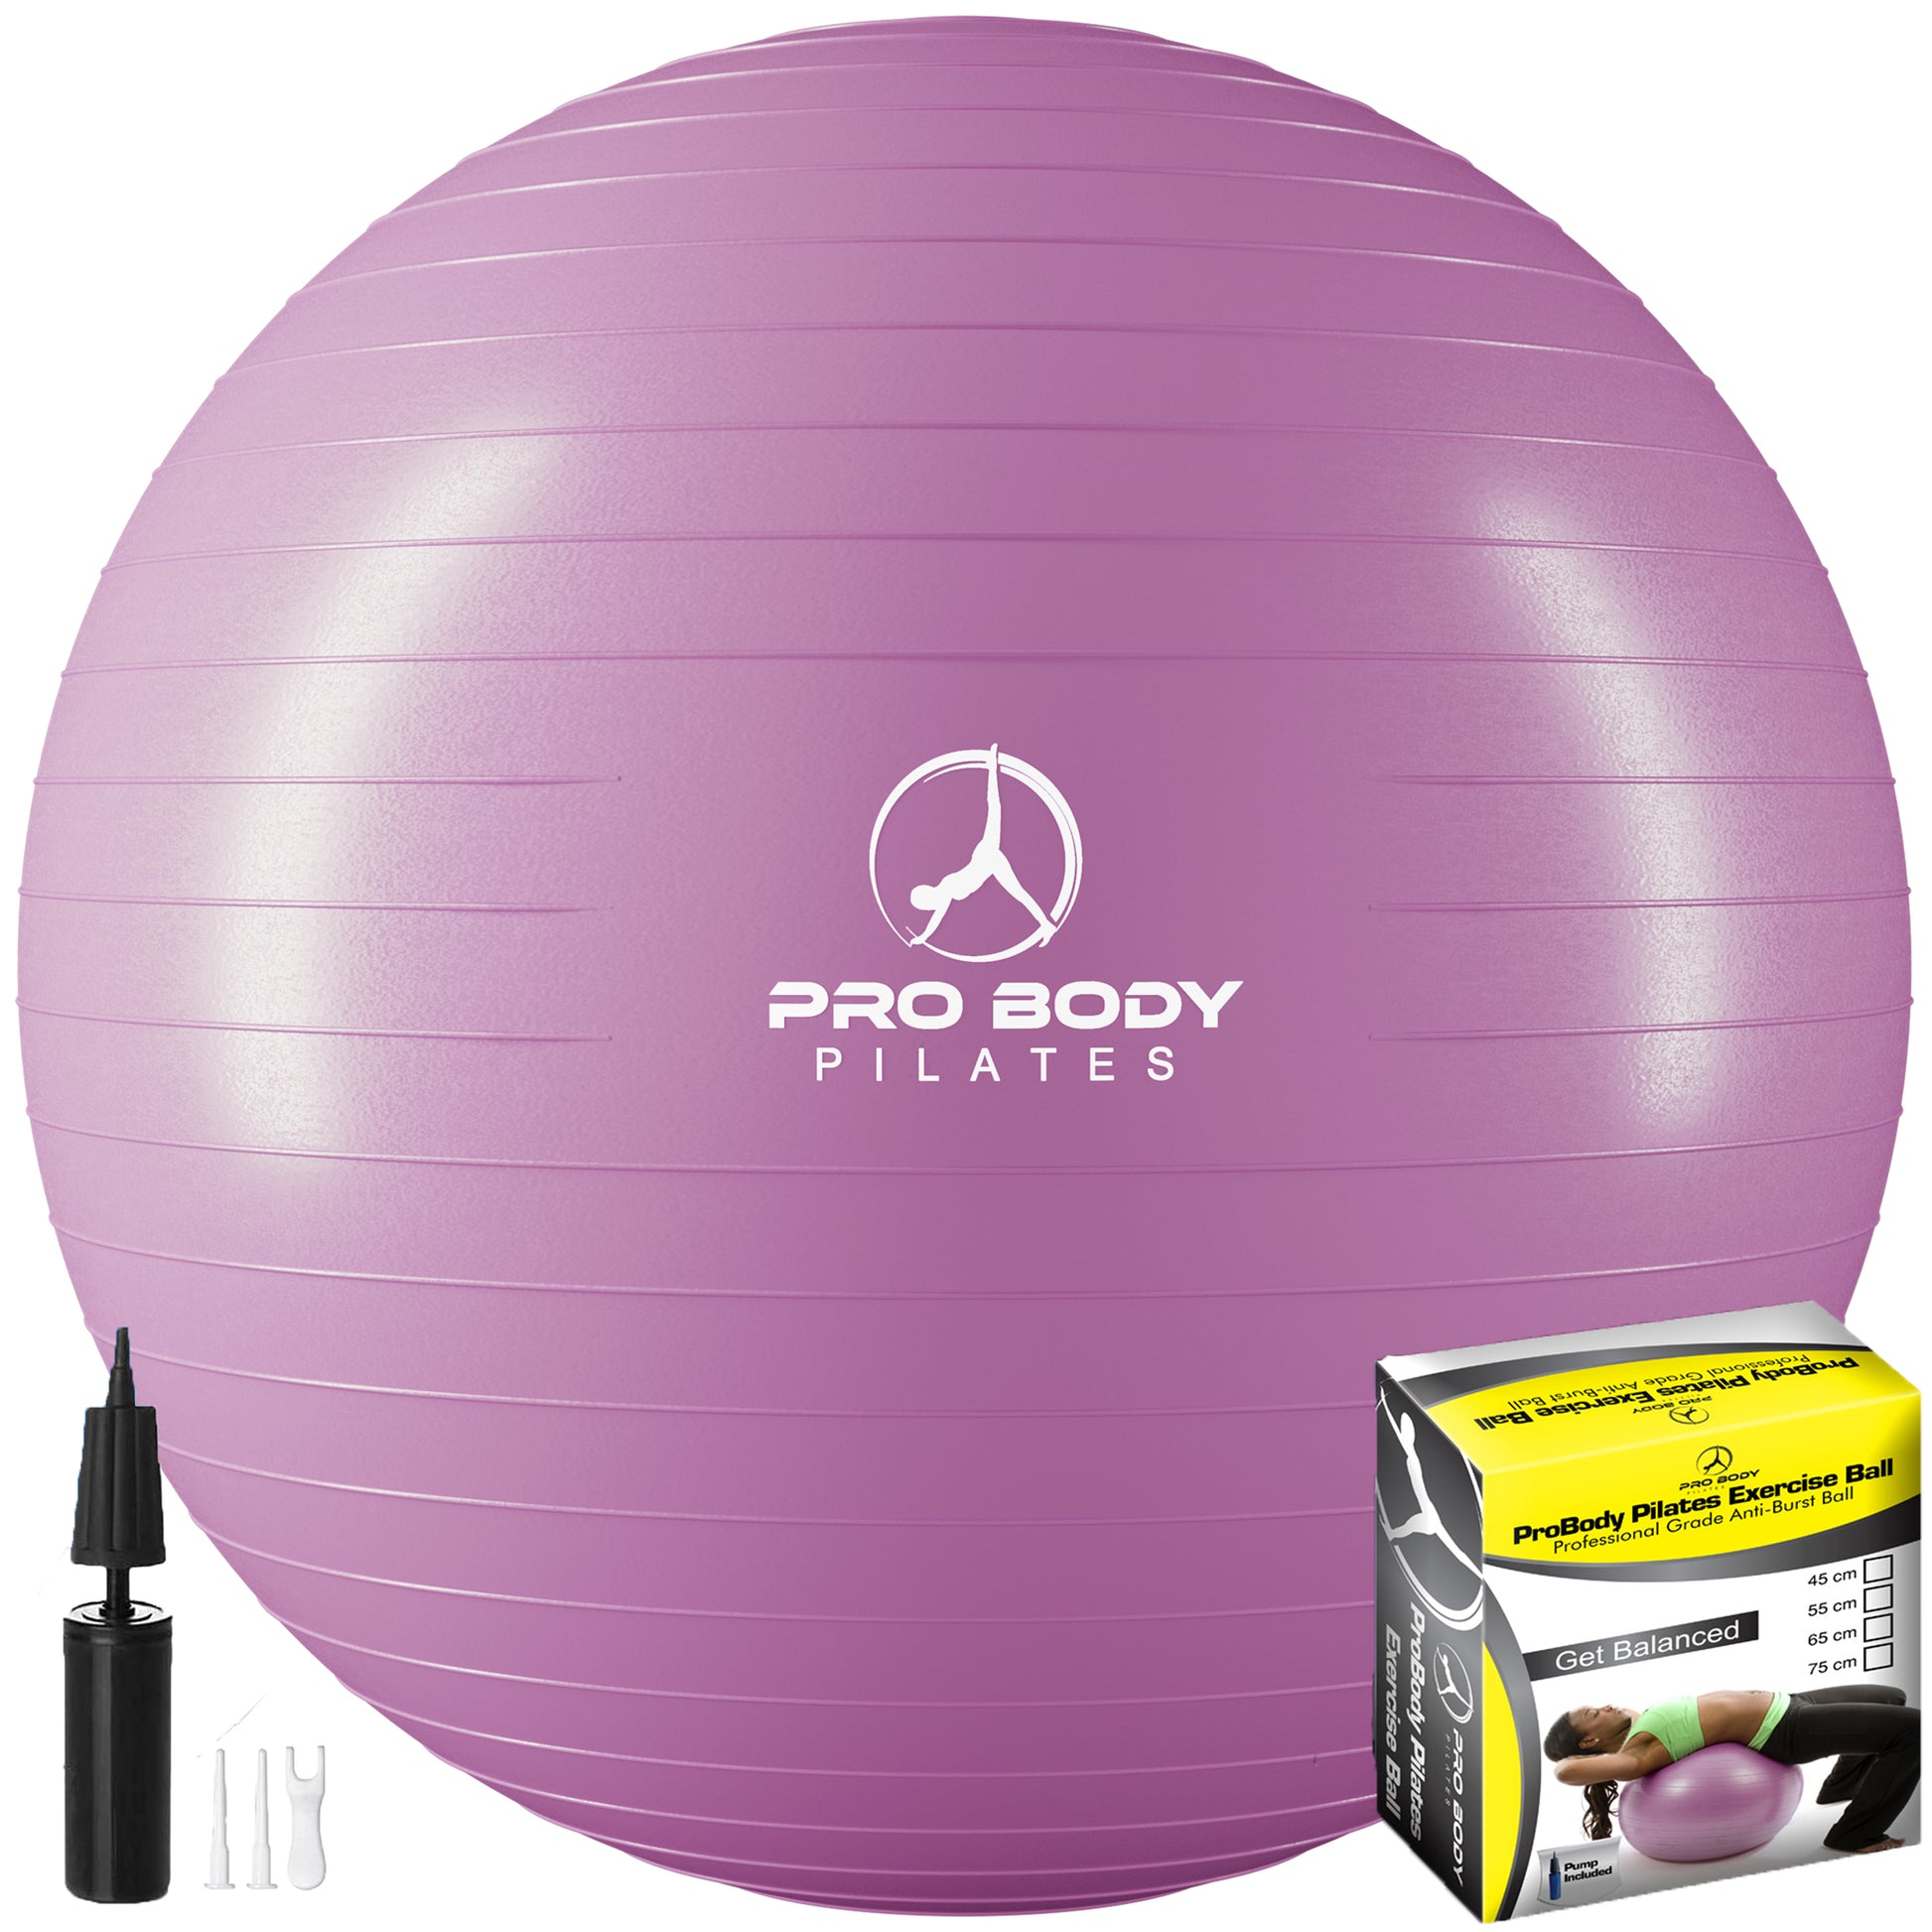 Yoga Ball for Pregnancy, Fitness, Balance, Workout at Home, Office